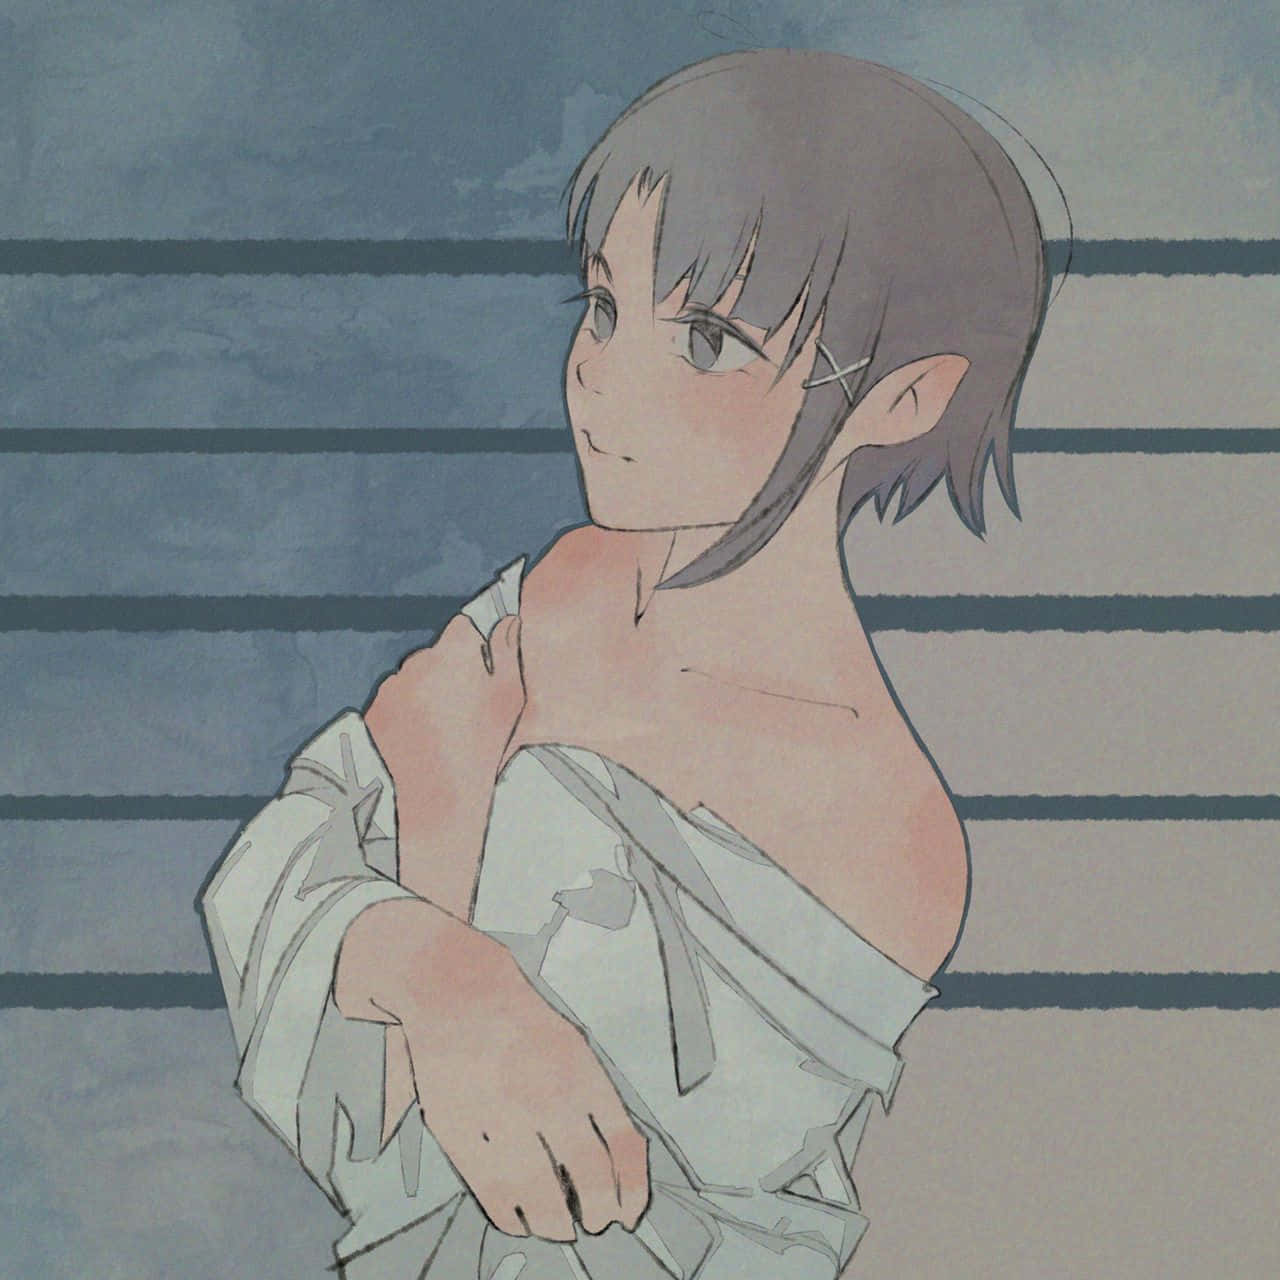 Serial Experiments Lain, An Anime Based On The Concept Of Cyber-existence